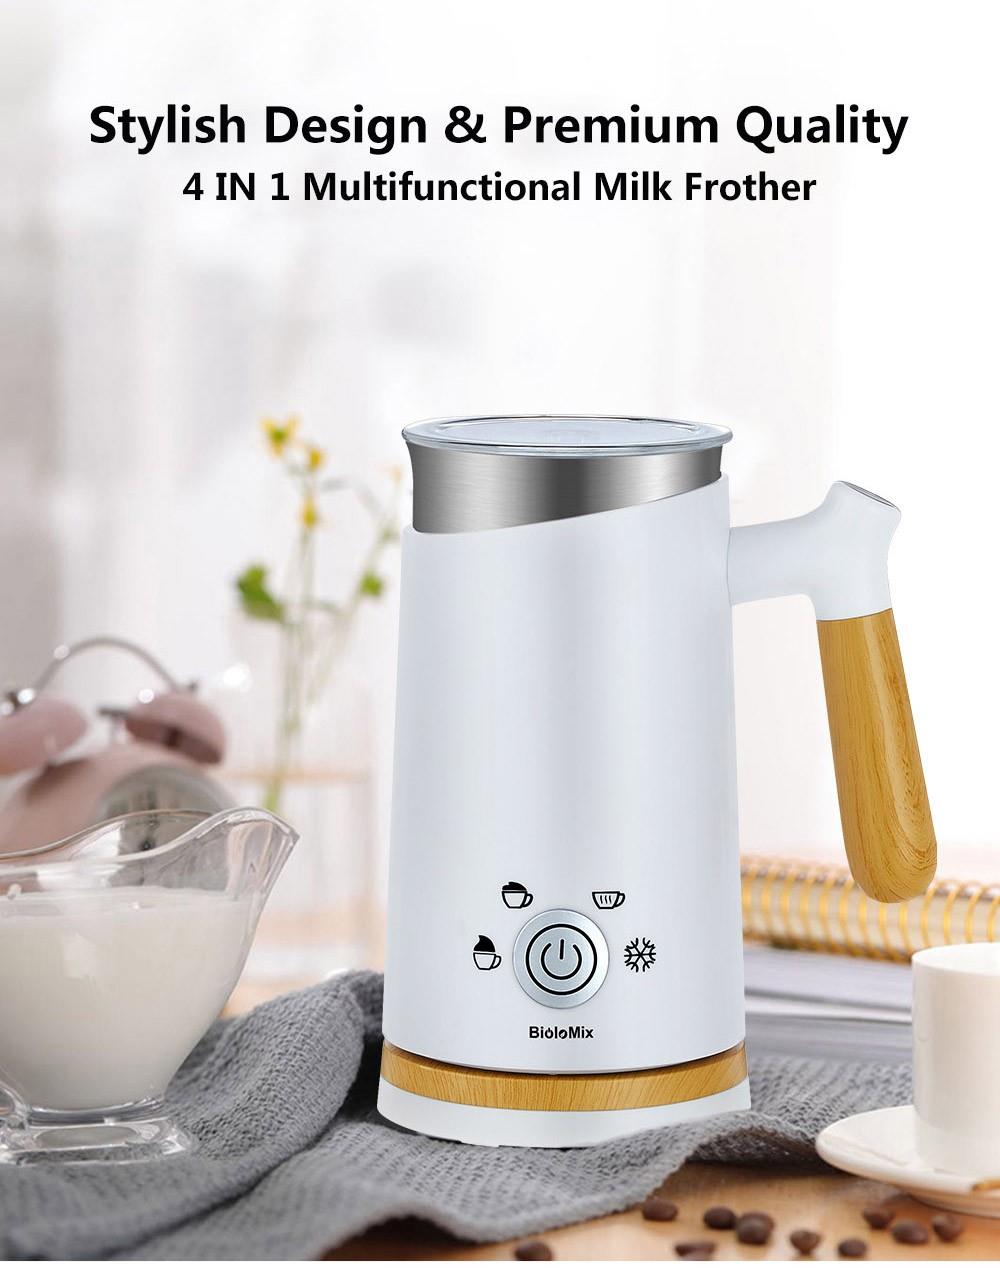 Electronic Multifunctional Milk Frother Frothing And Heating